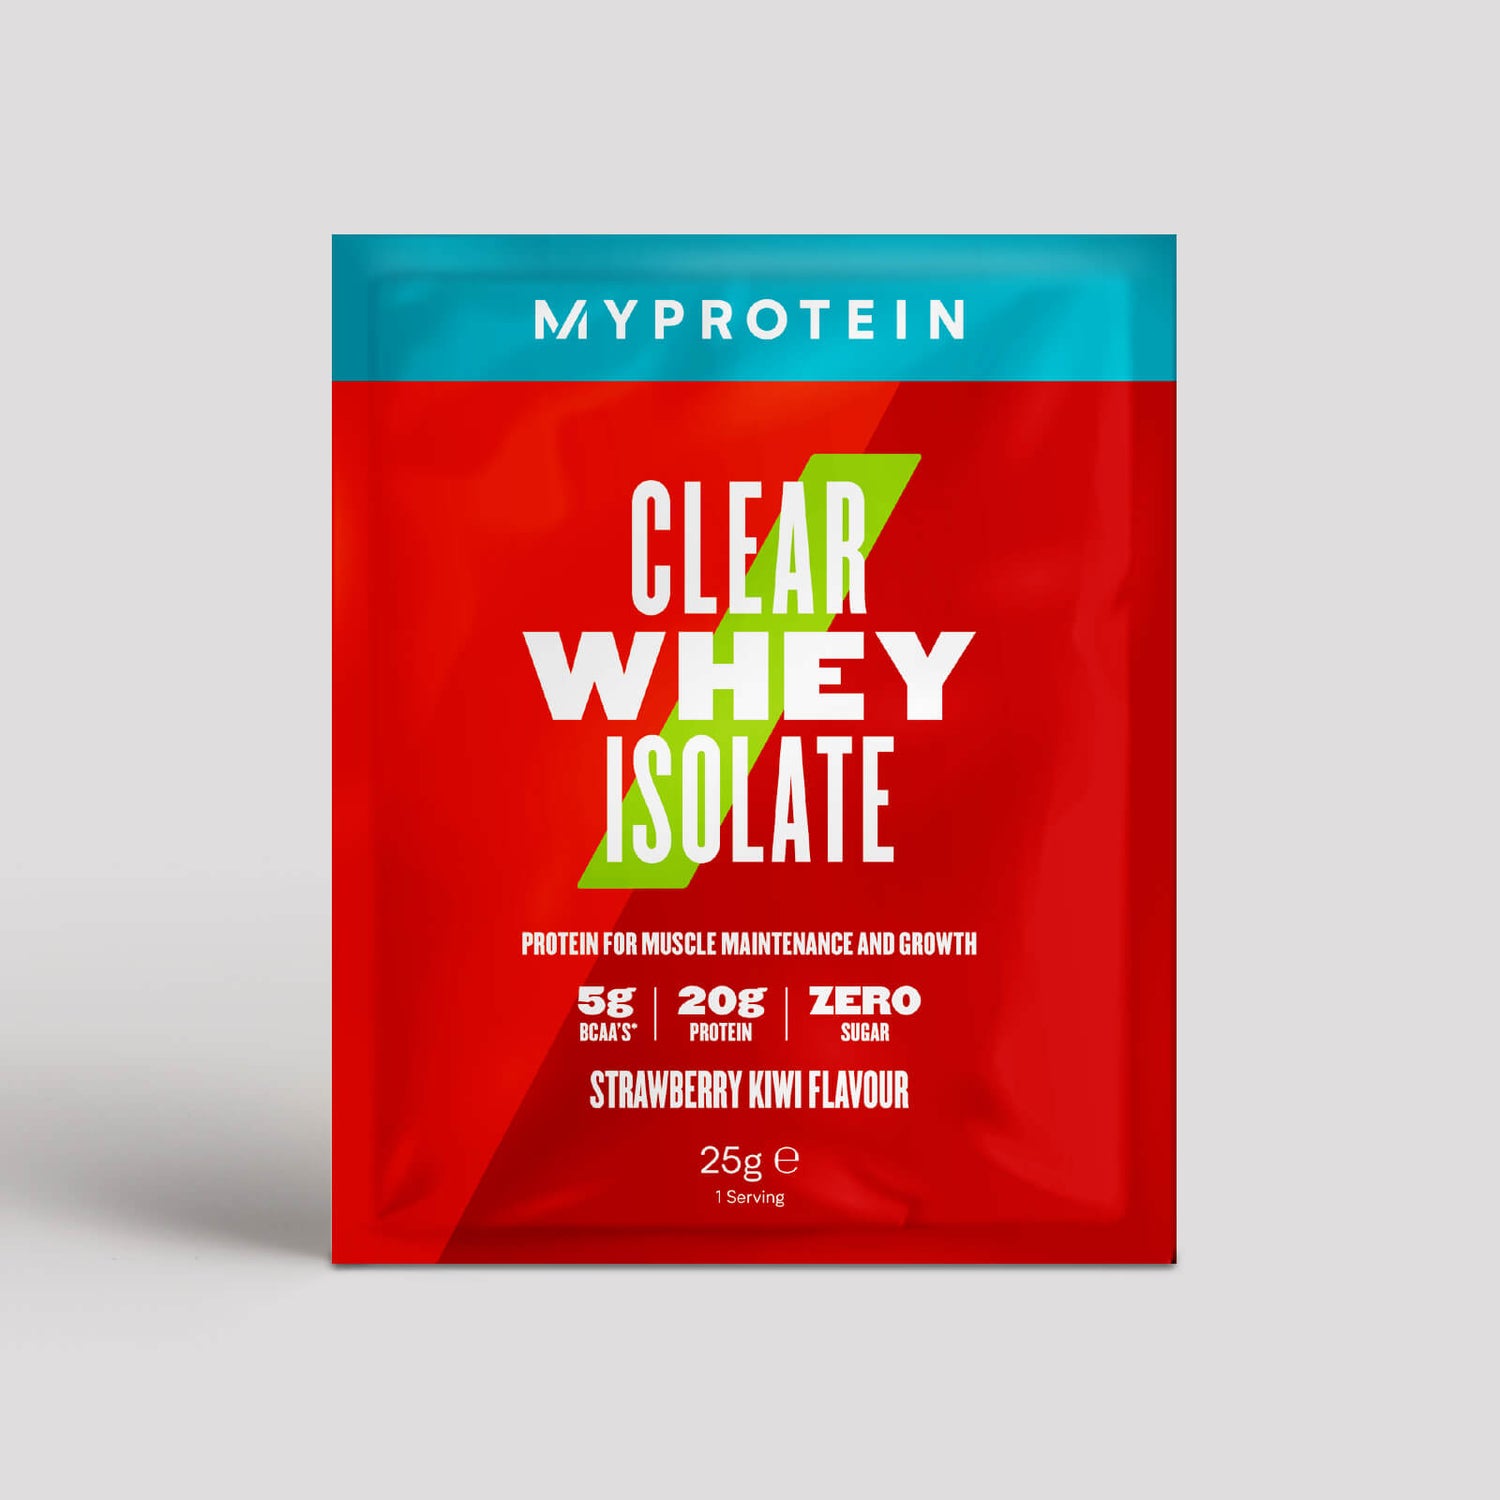 Clear Whey Isolate (Sample) - 1servings - Strawberry Kiwi